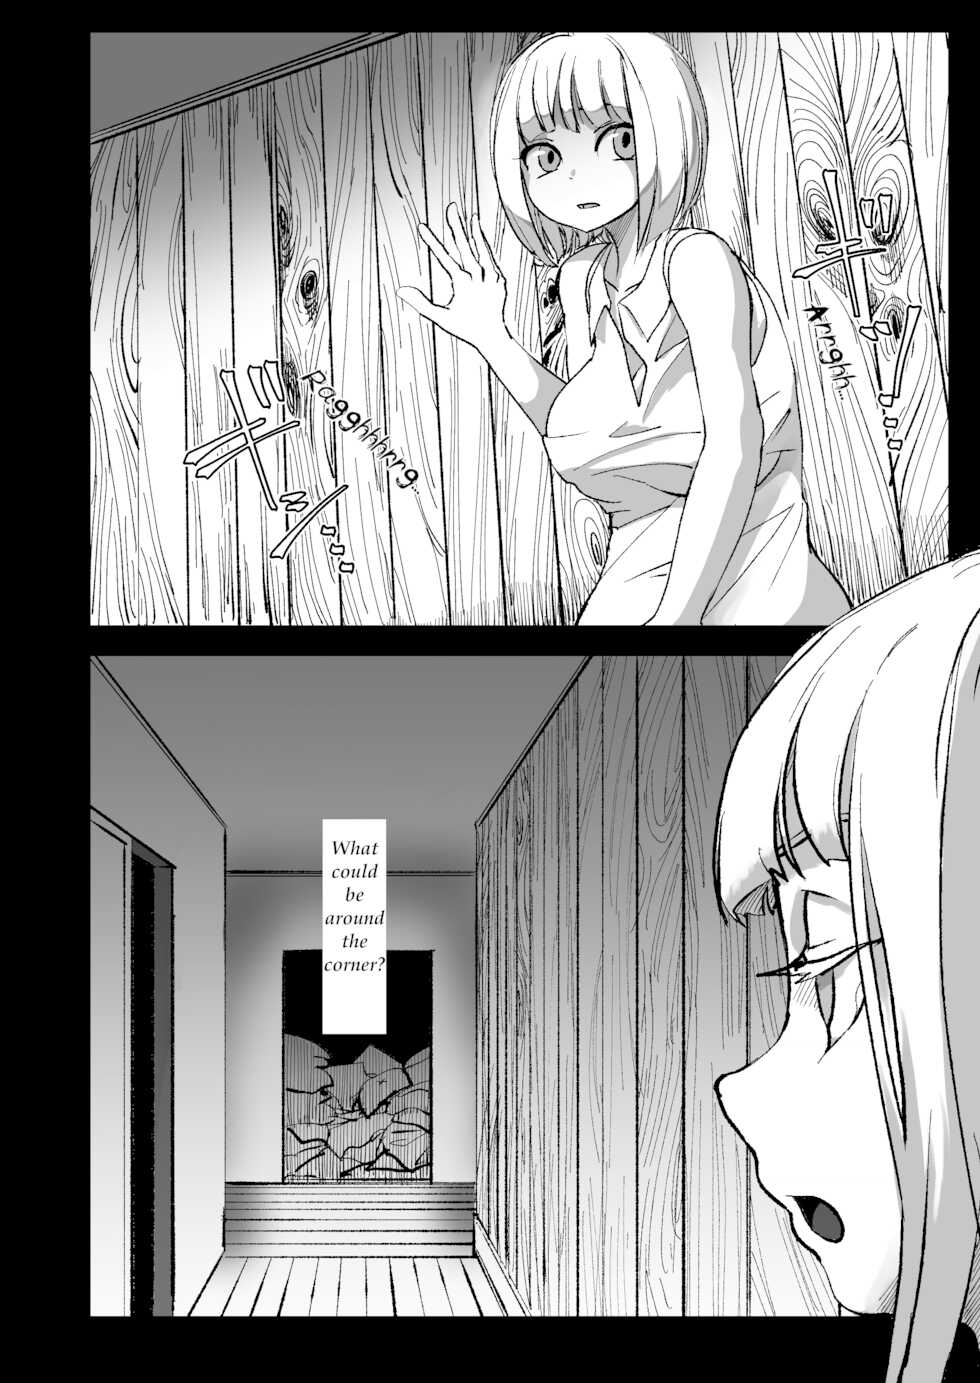 [Shimanami (Archipelago)] Dead End House Anthology - (The Chandelier/1.5/The Exorcist/Spinoff Expansions) [Ongoing] - Page 6